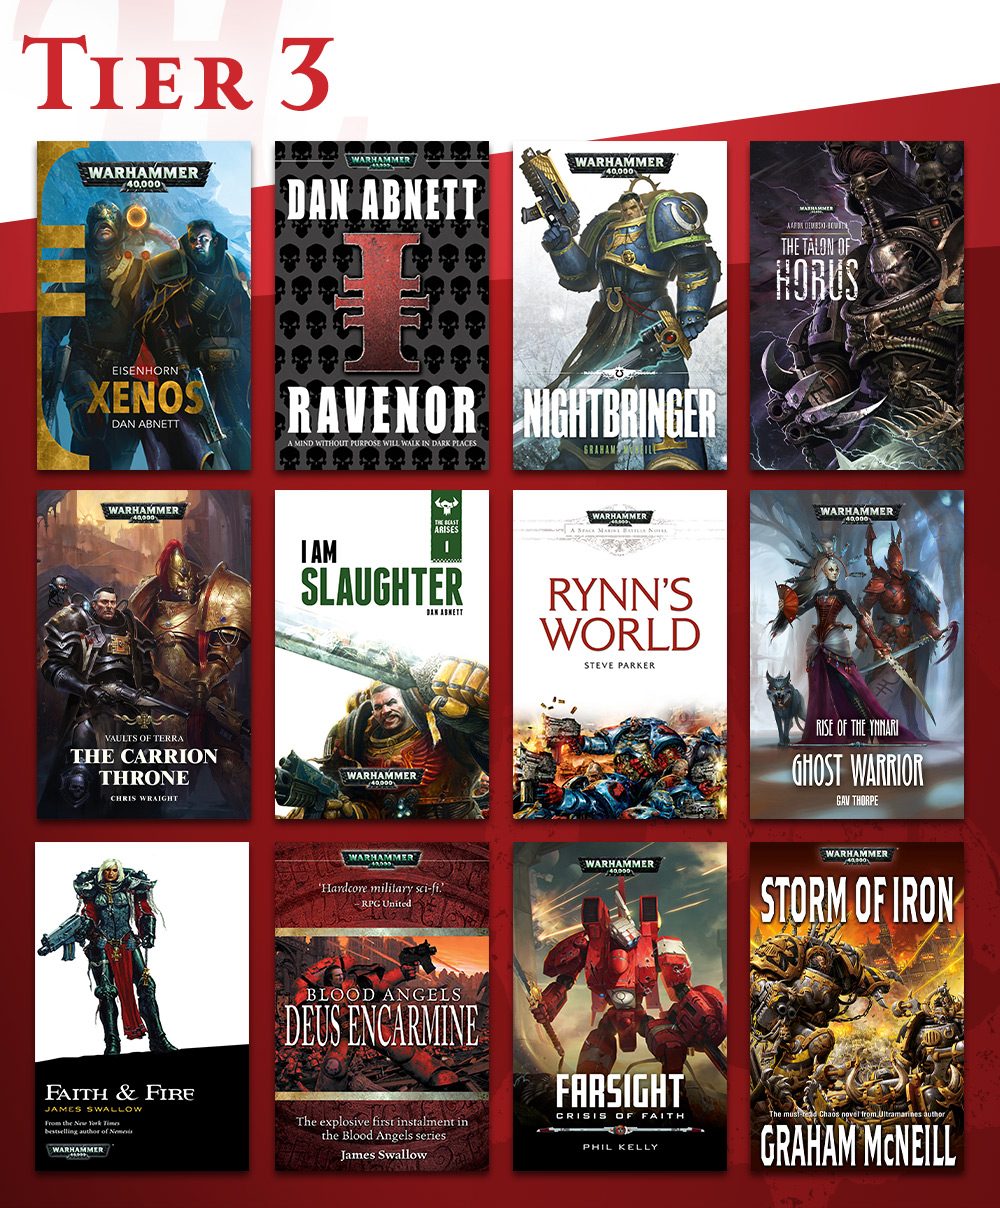 What are the most popular Warhammer 40k book series?